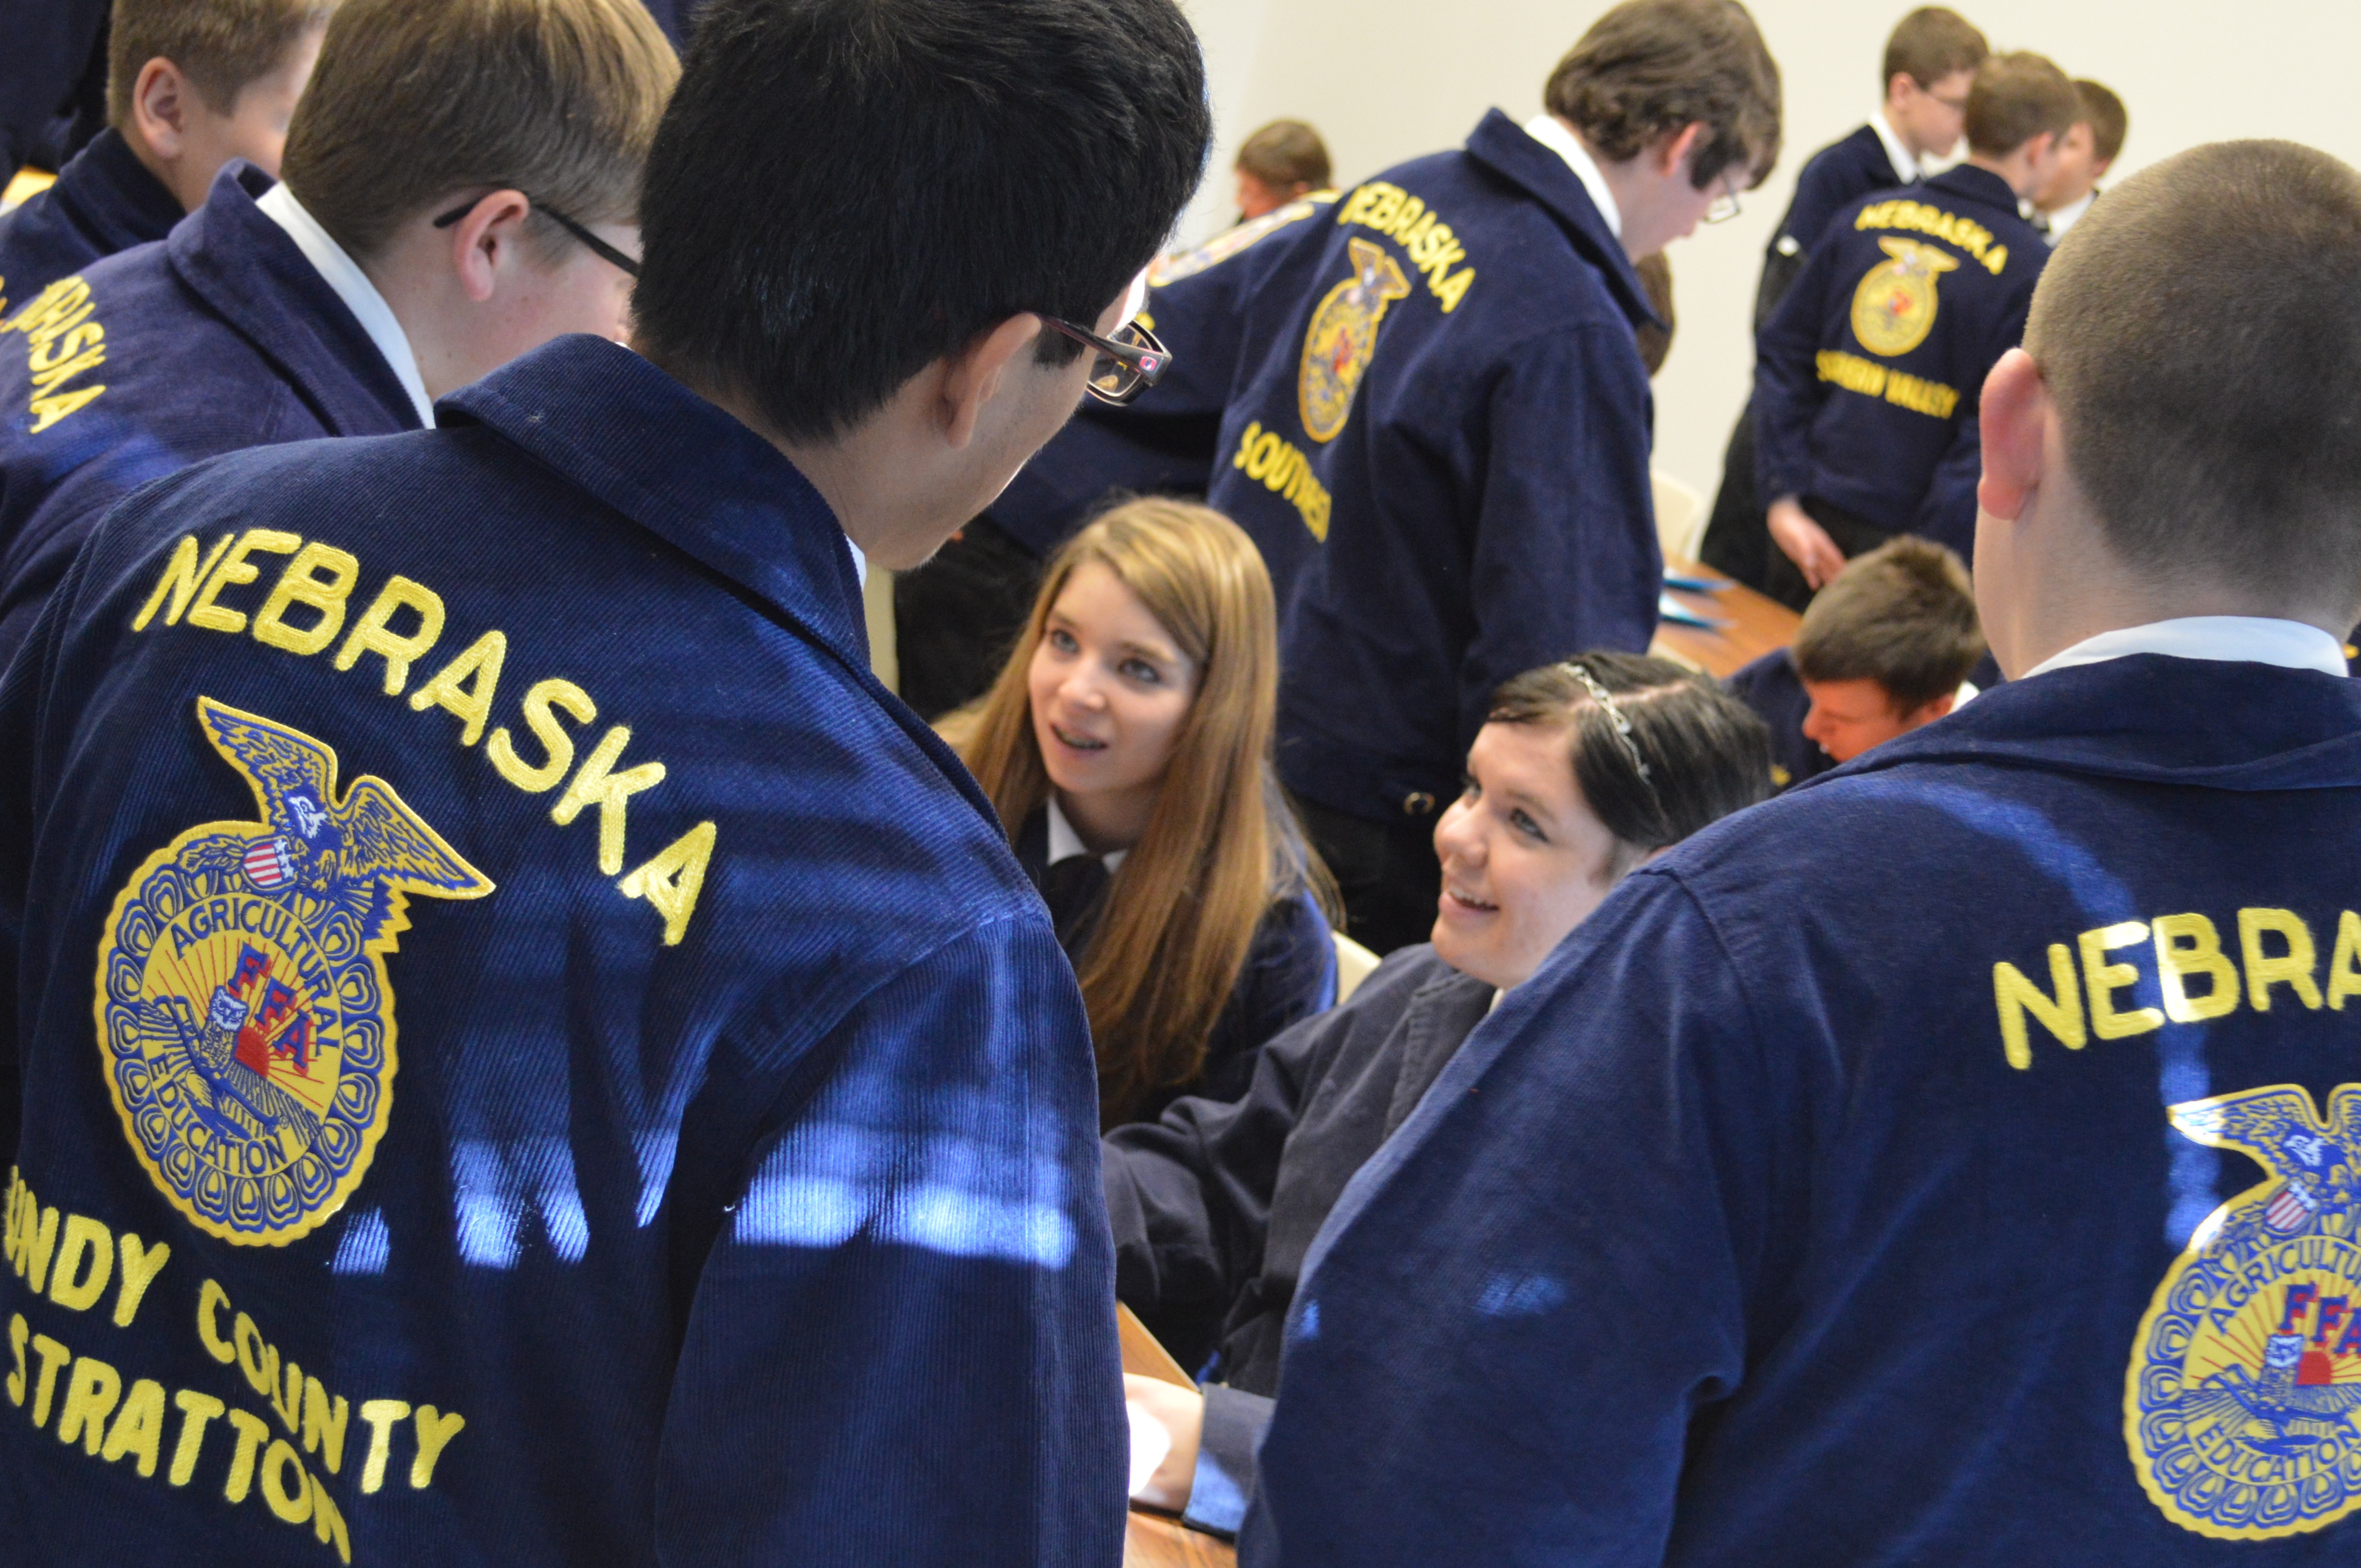 FFA students compete in a District FFA livestock management contest at NCTA. (Crawford/NCTA photo)